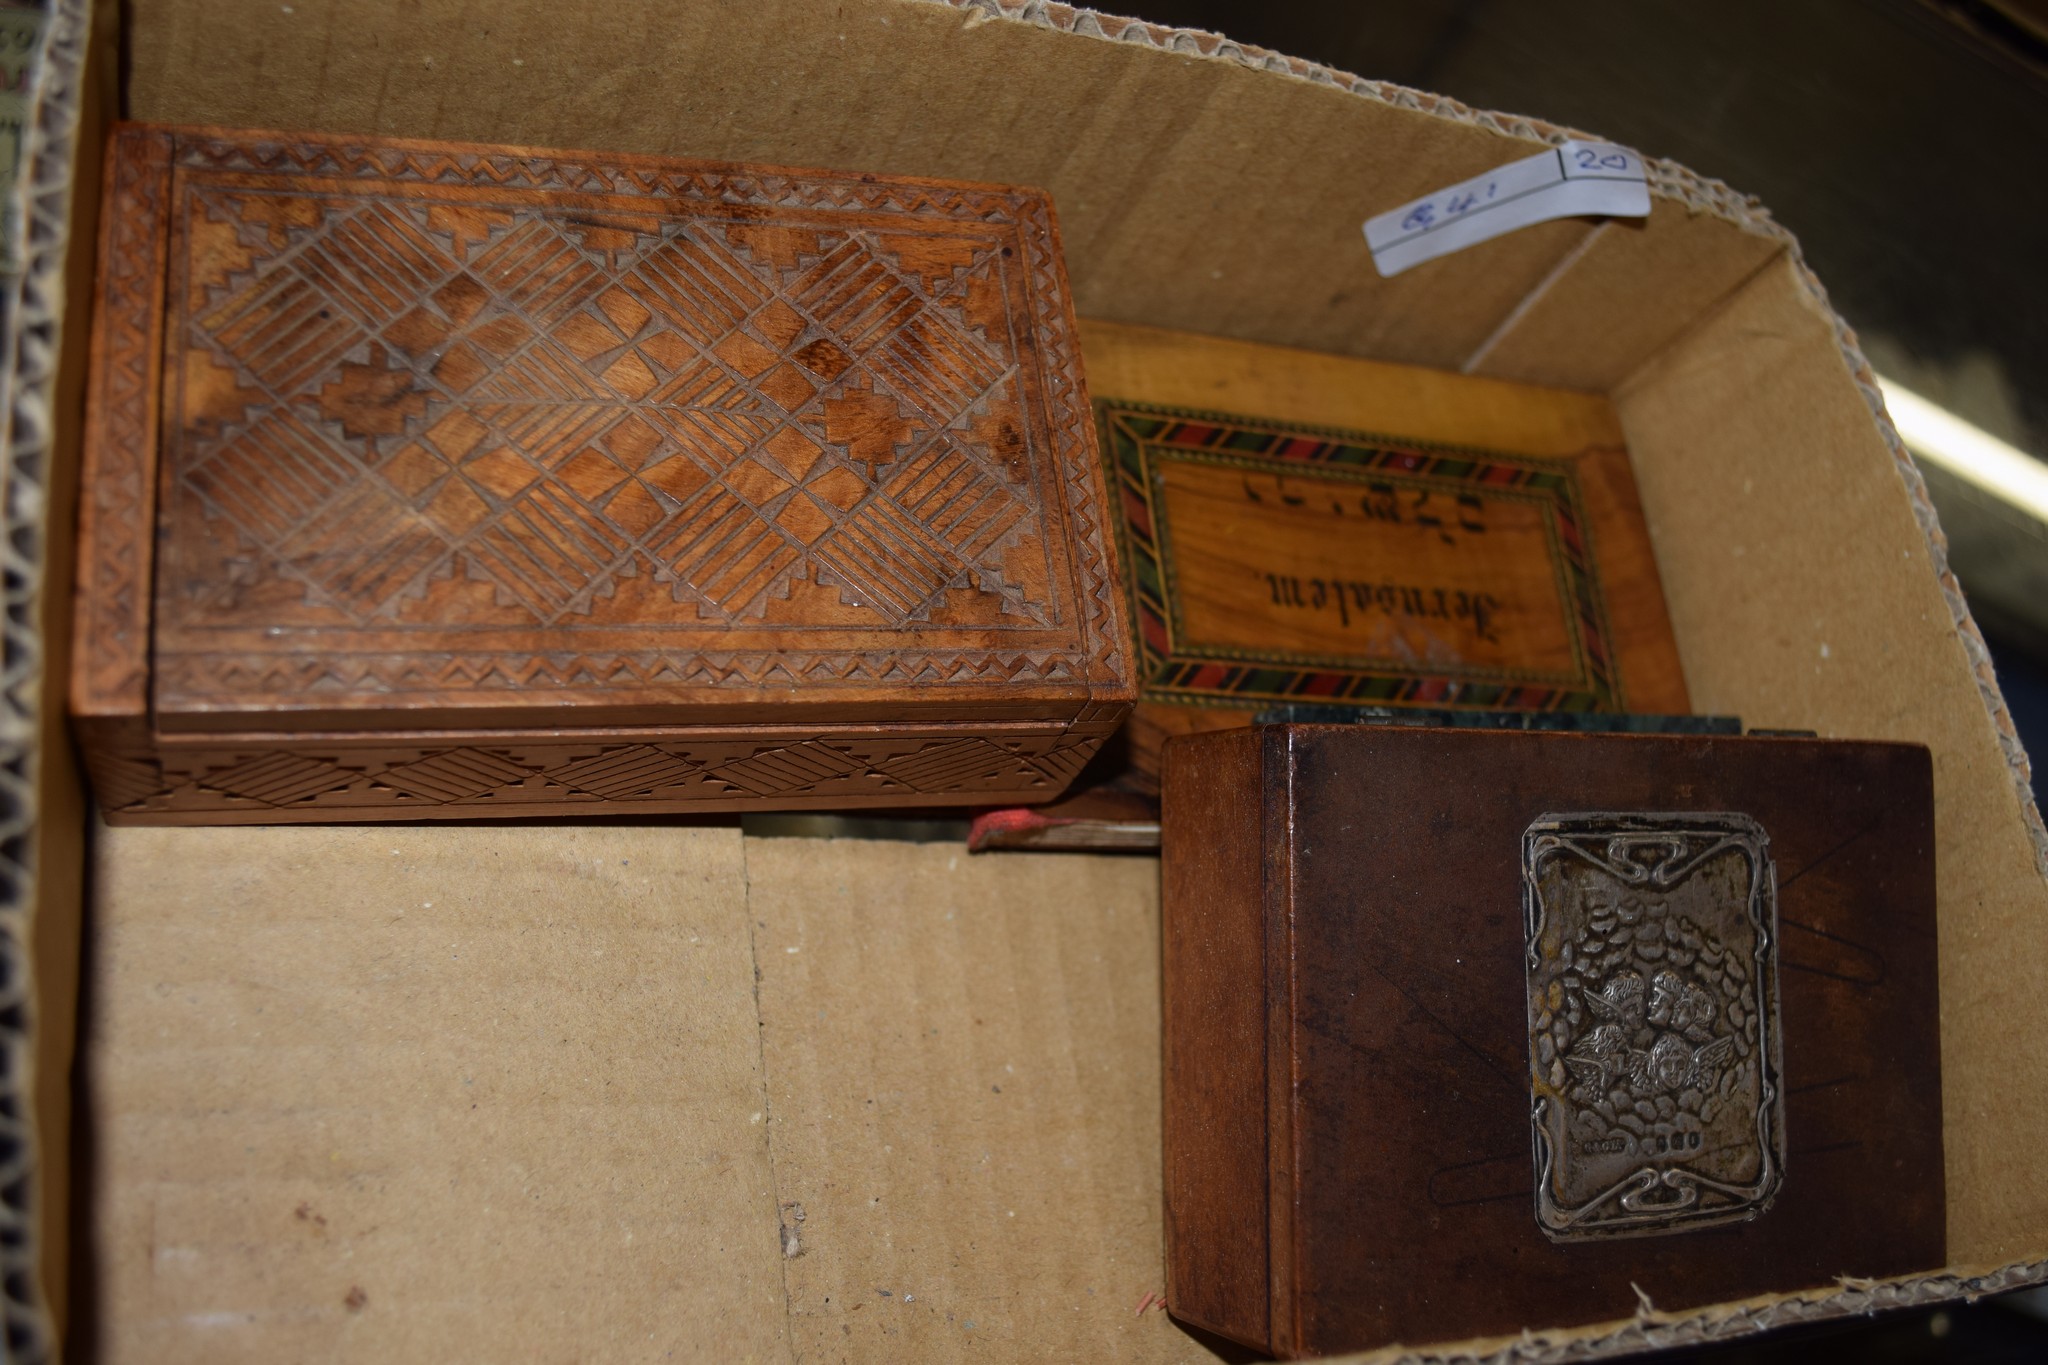 BOX CONTAINING VARIOUS WOODEN BOXES